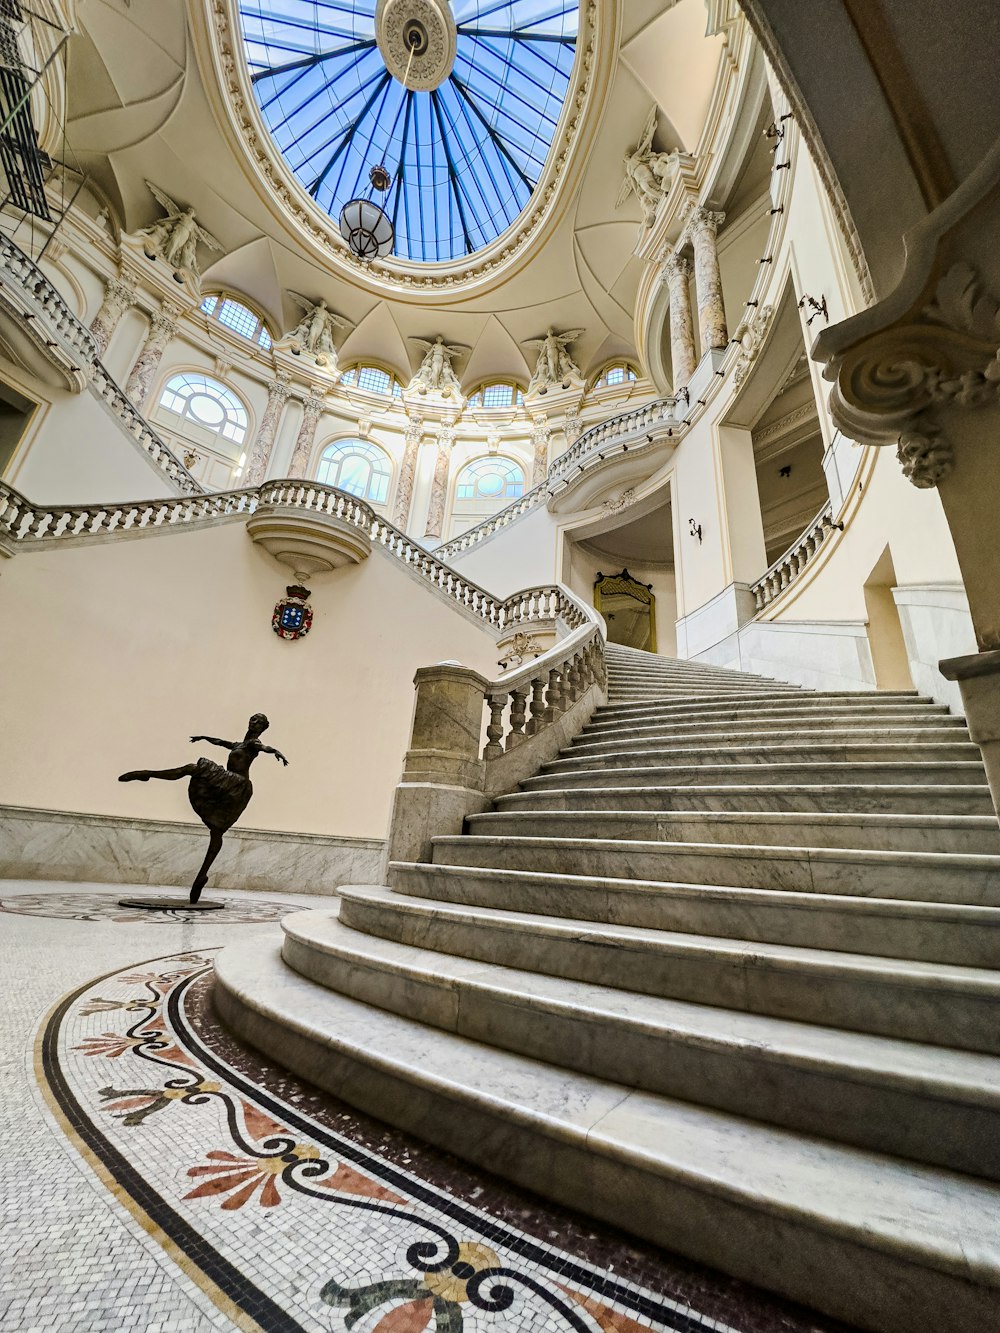 a person doing a trick on a stair case